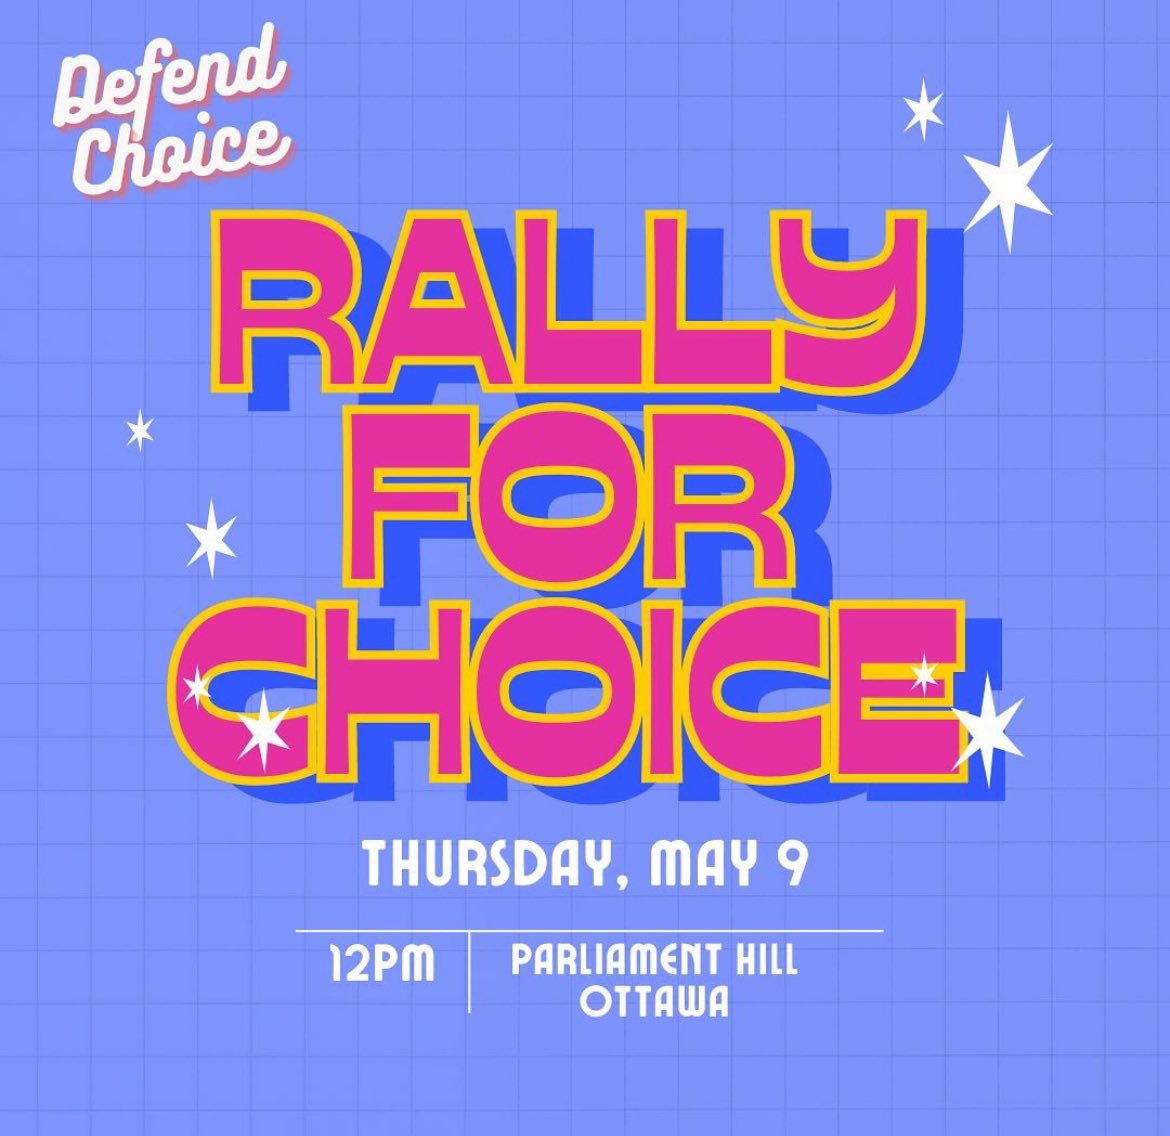 Ottawa : Heads up that on Thursday, 'March for Life' is coming to town. Local group 'Defend Choice' is organizing a counter protest starting at noon on the Hill. Spread the word!